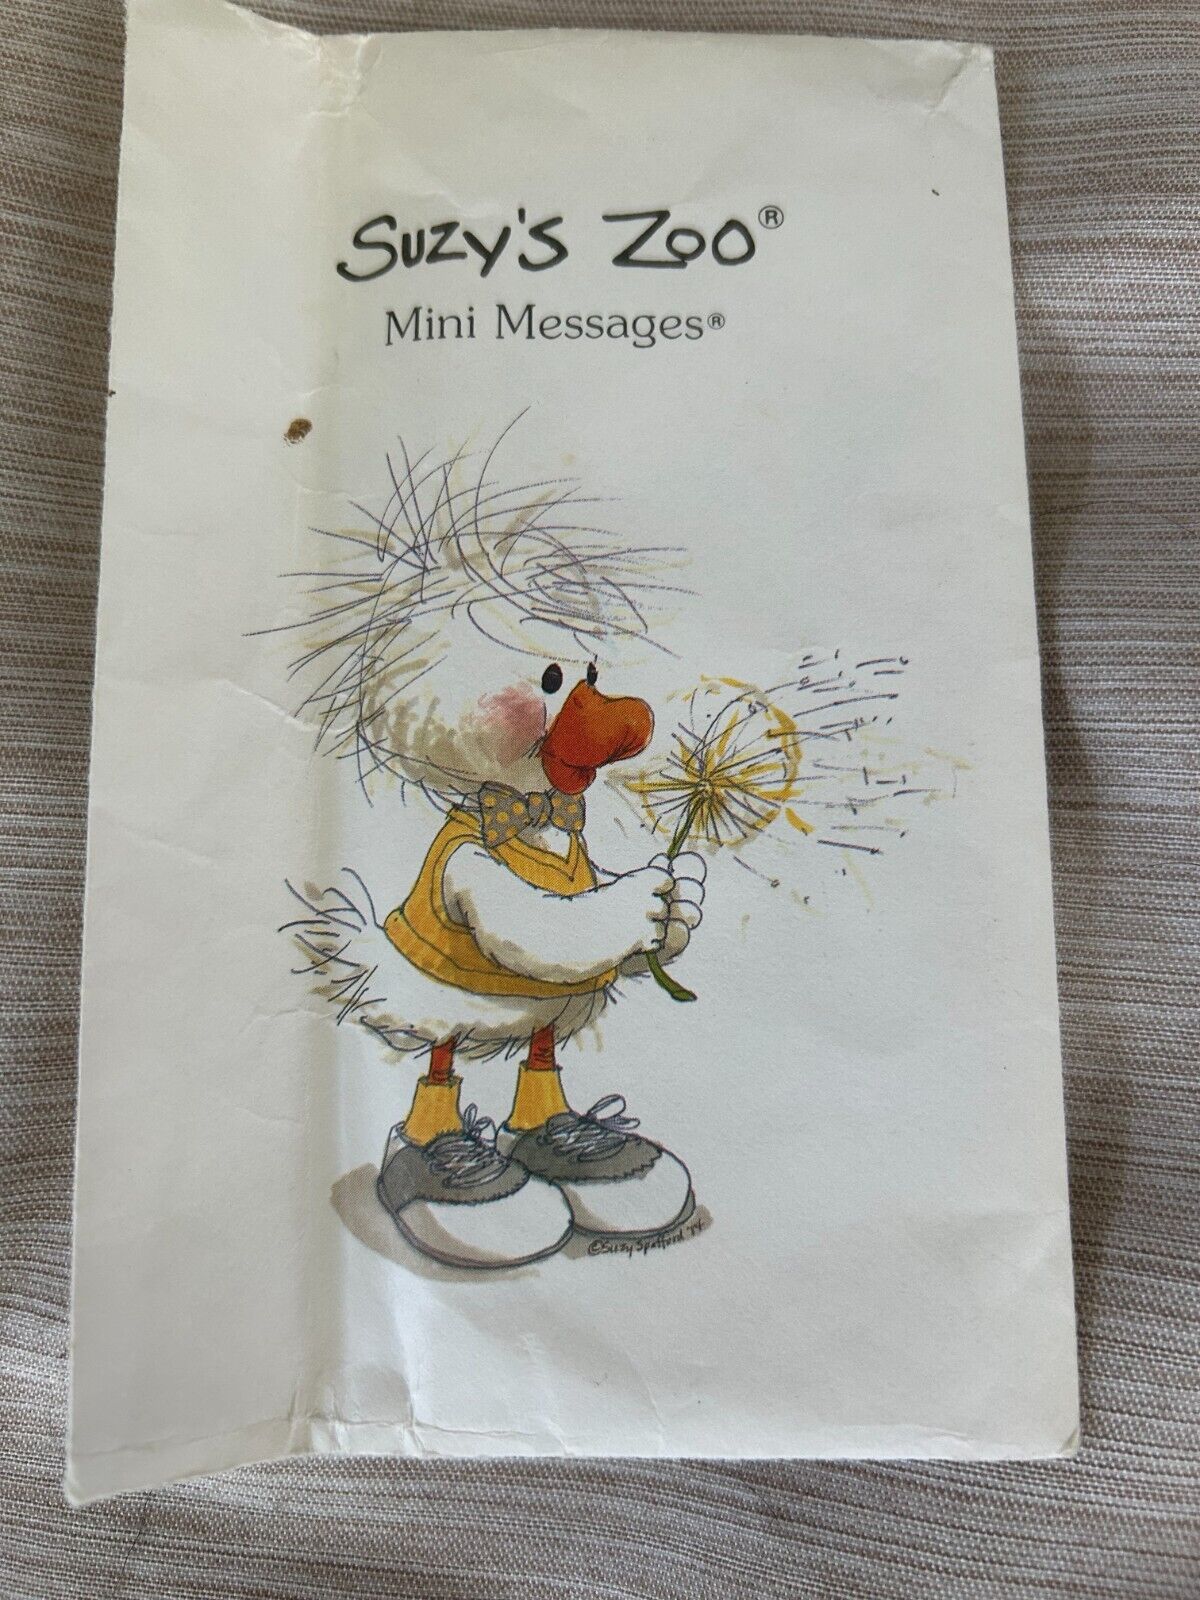 Suzy’s Zoo Mini Messages  from the 1980s - 20